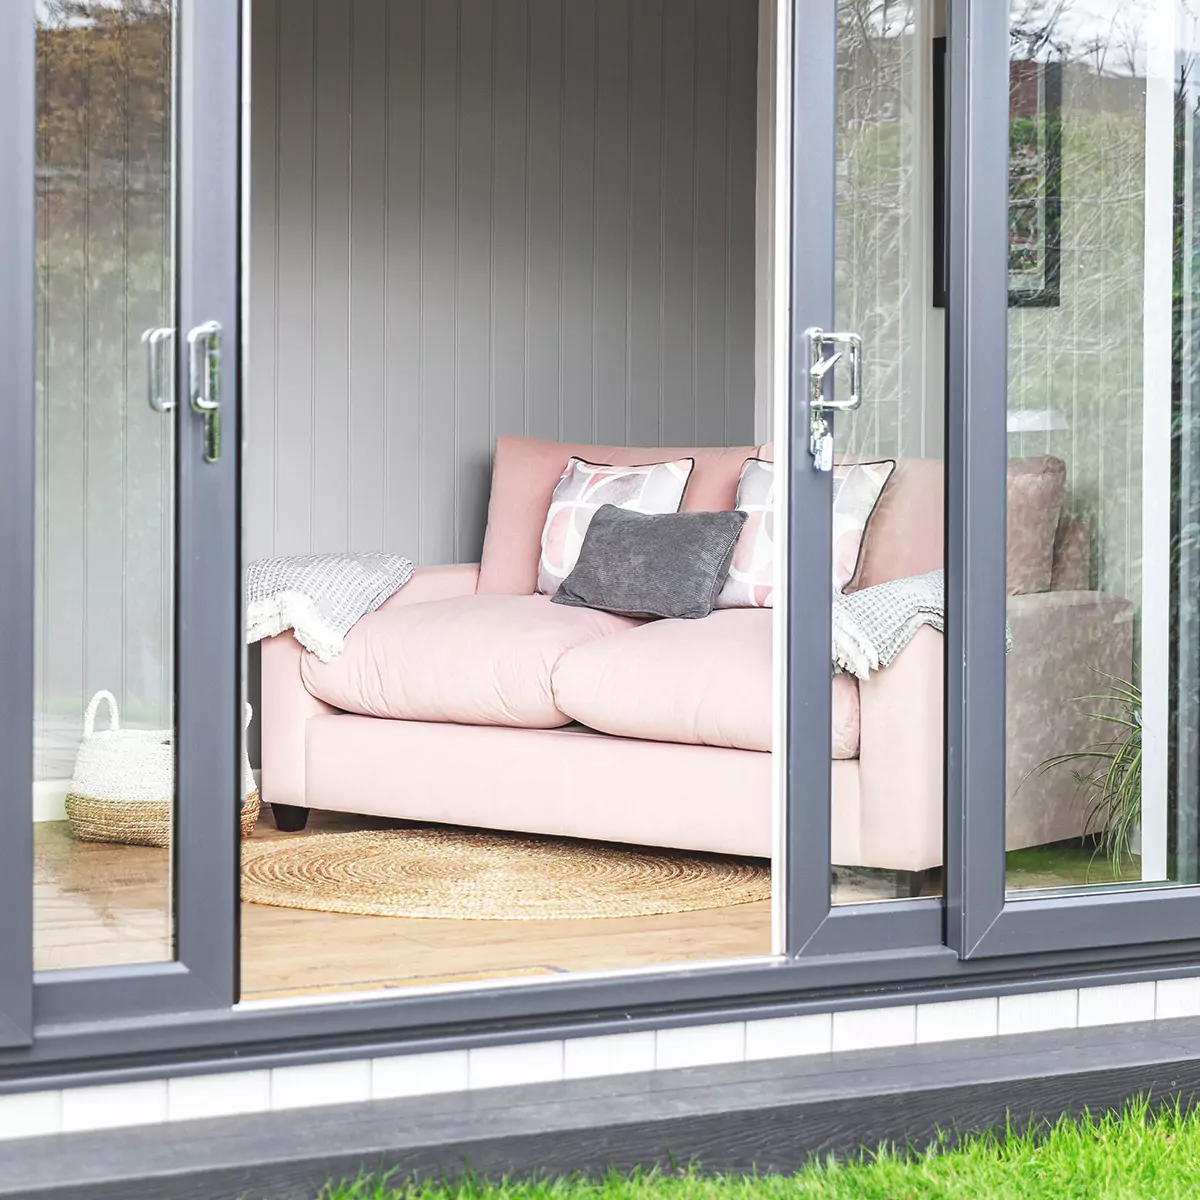 sliding glass doors with view into garden room office space with small pink couch and grey sofas 